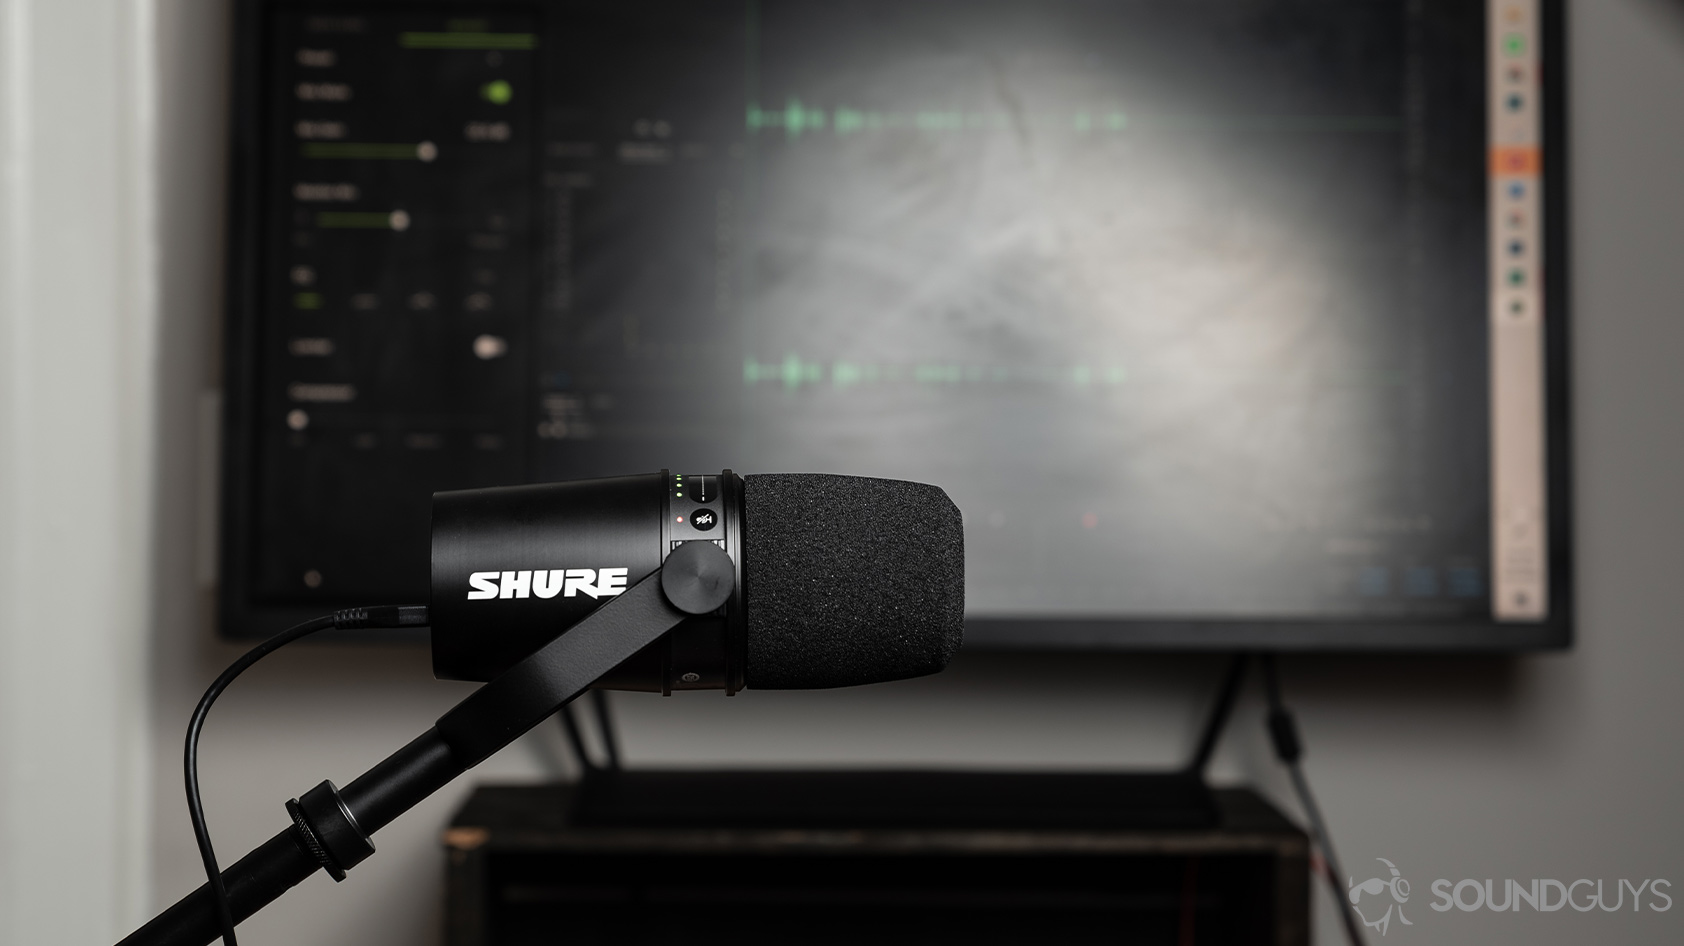 The Shure MV7 USB microphone in front of a computer monitor with Adobe Audition in use.